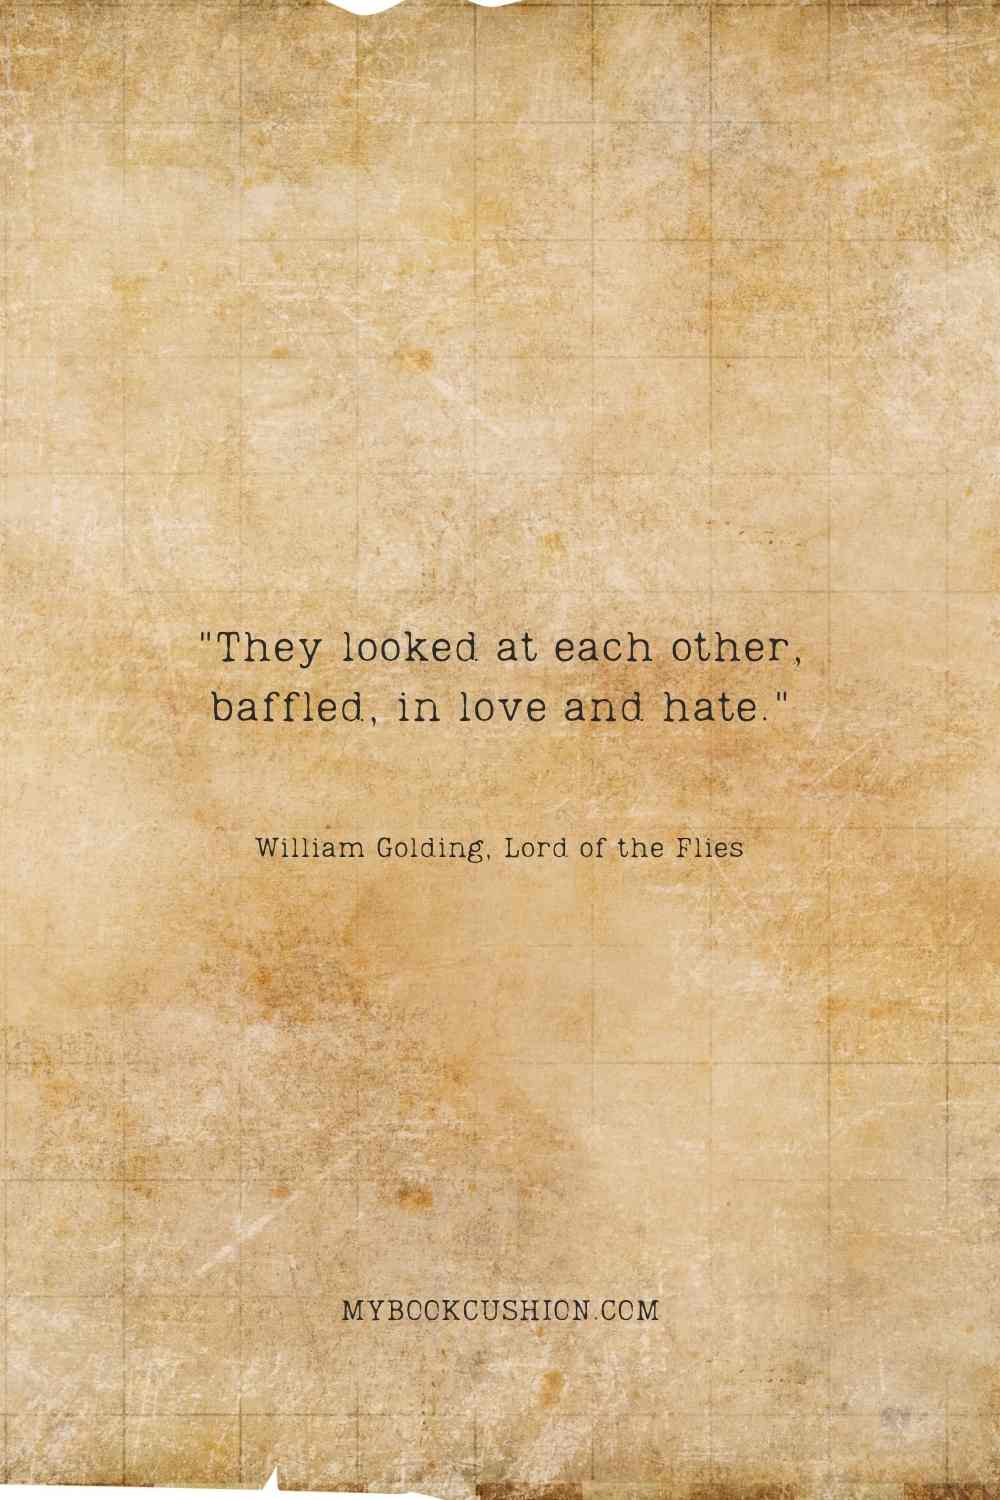 They looked at each other, baffled, in love and hate. - William Golding, Lord of the Flies